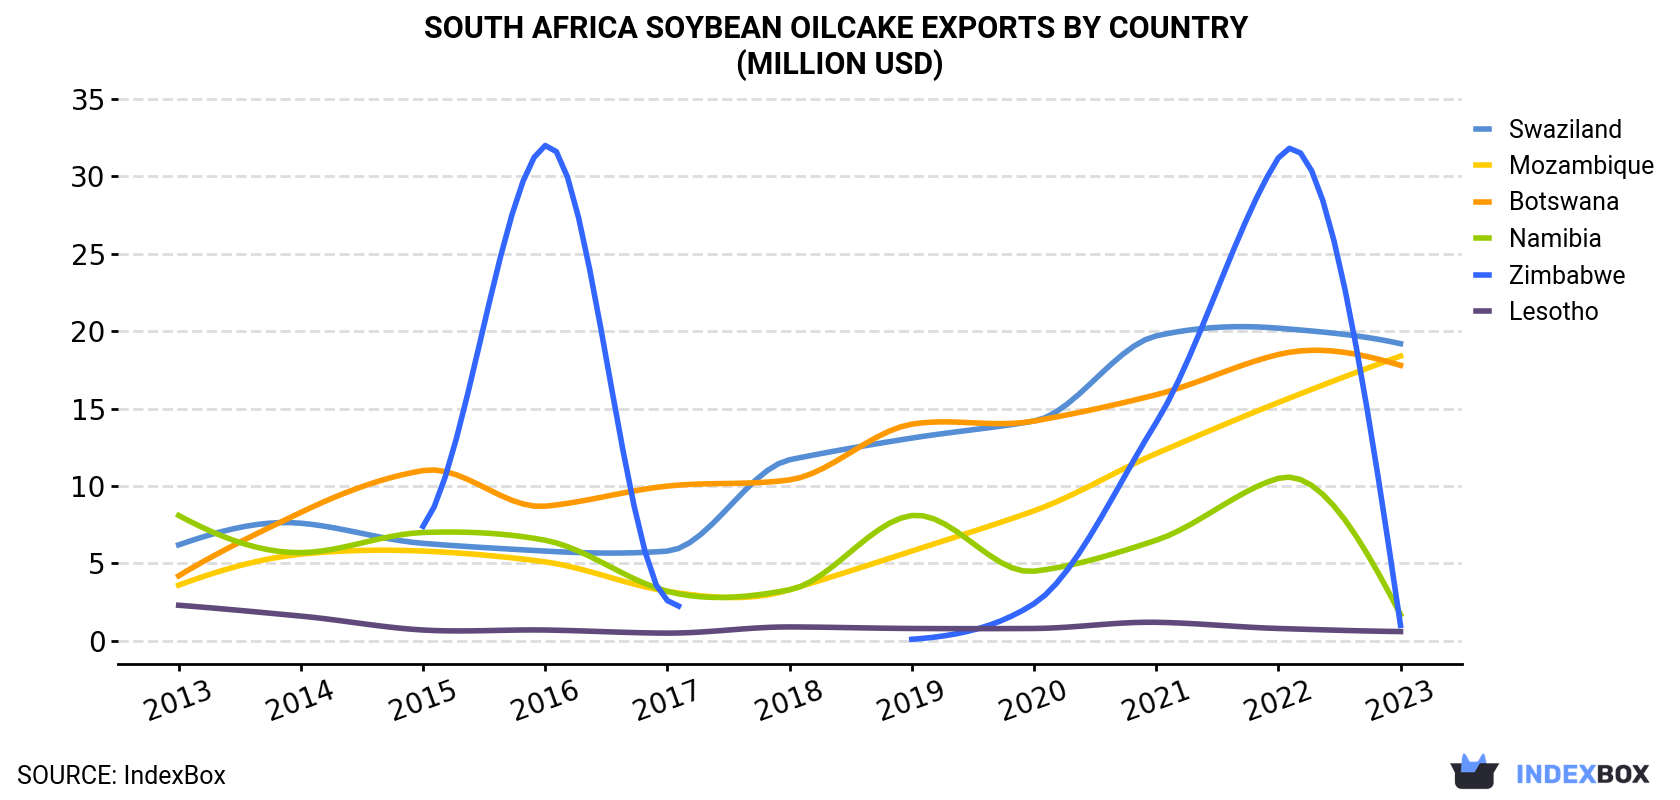 South Africa Soybean Oilcake Exports By Country (Million USD)